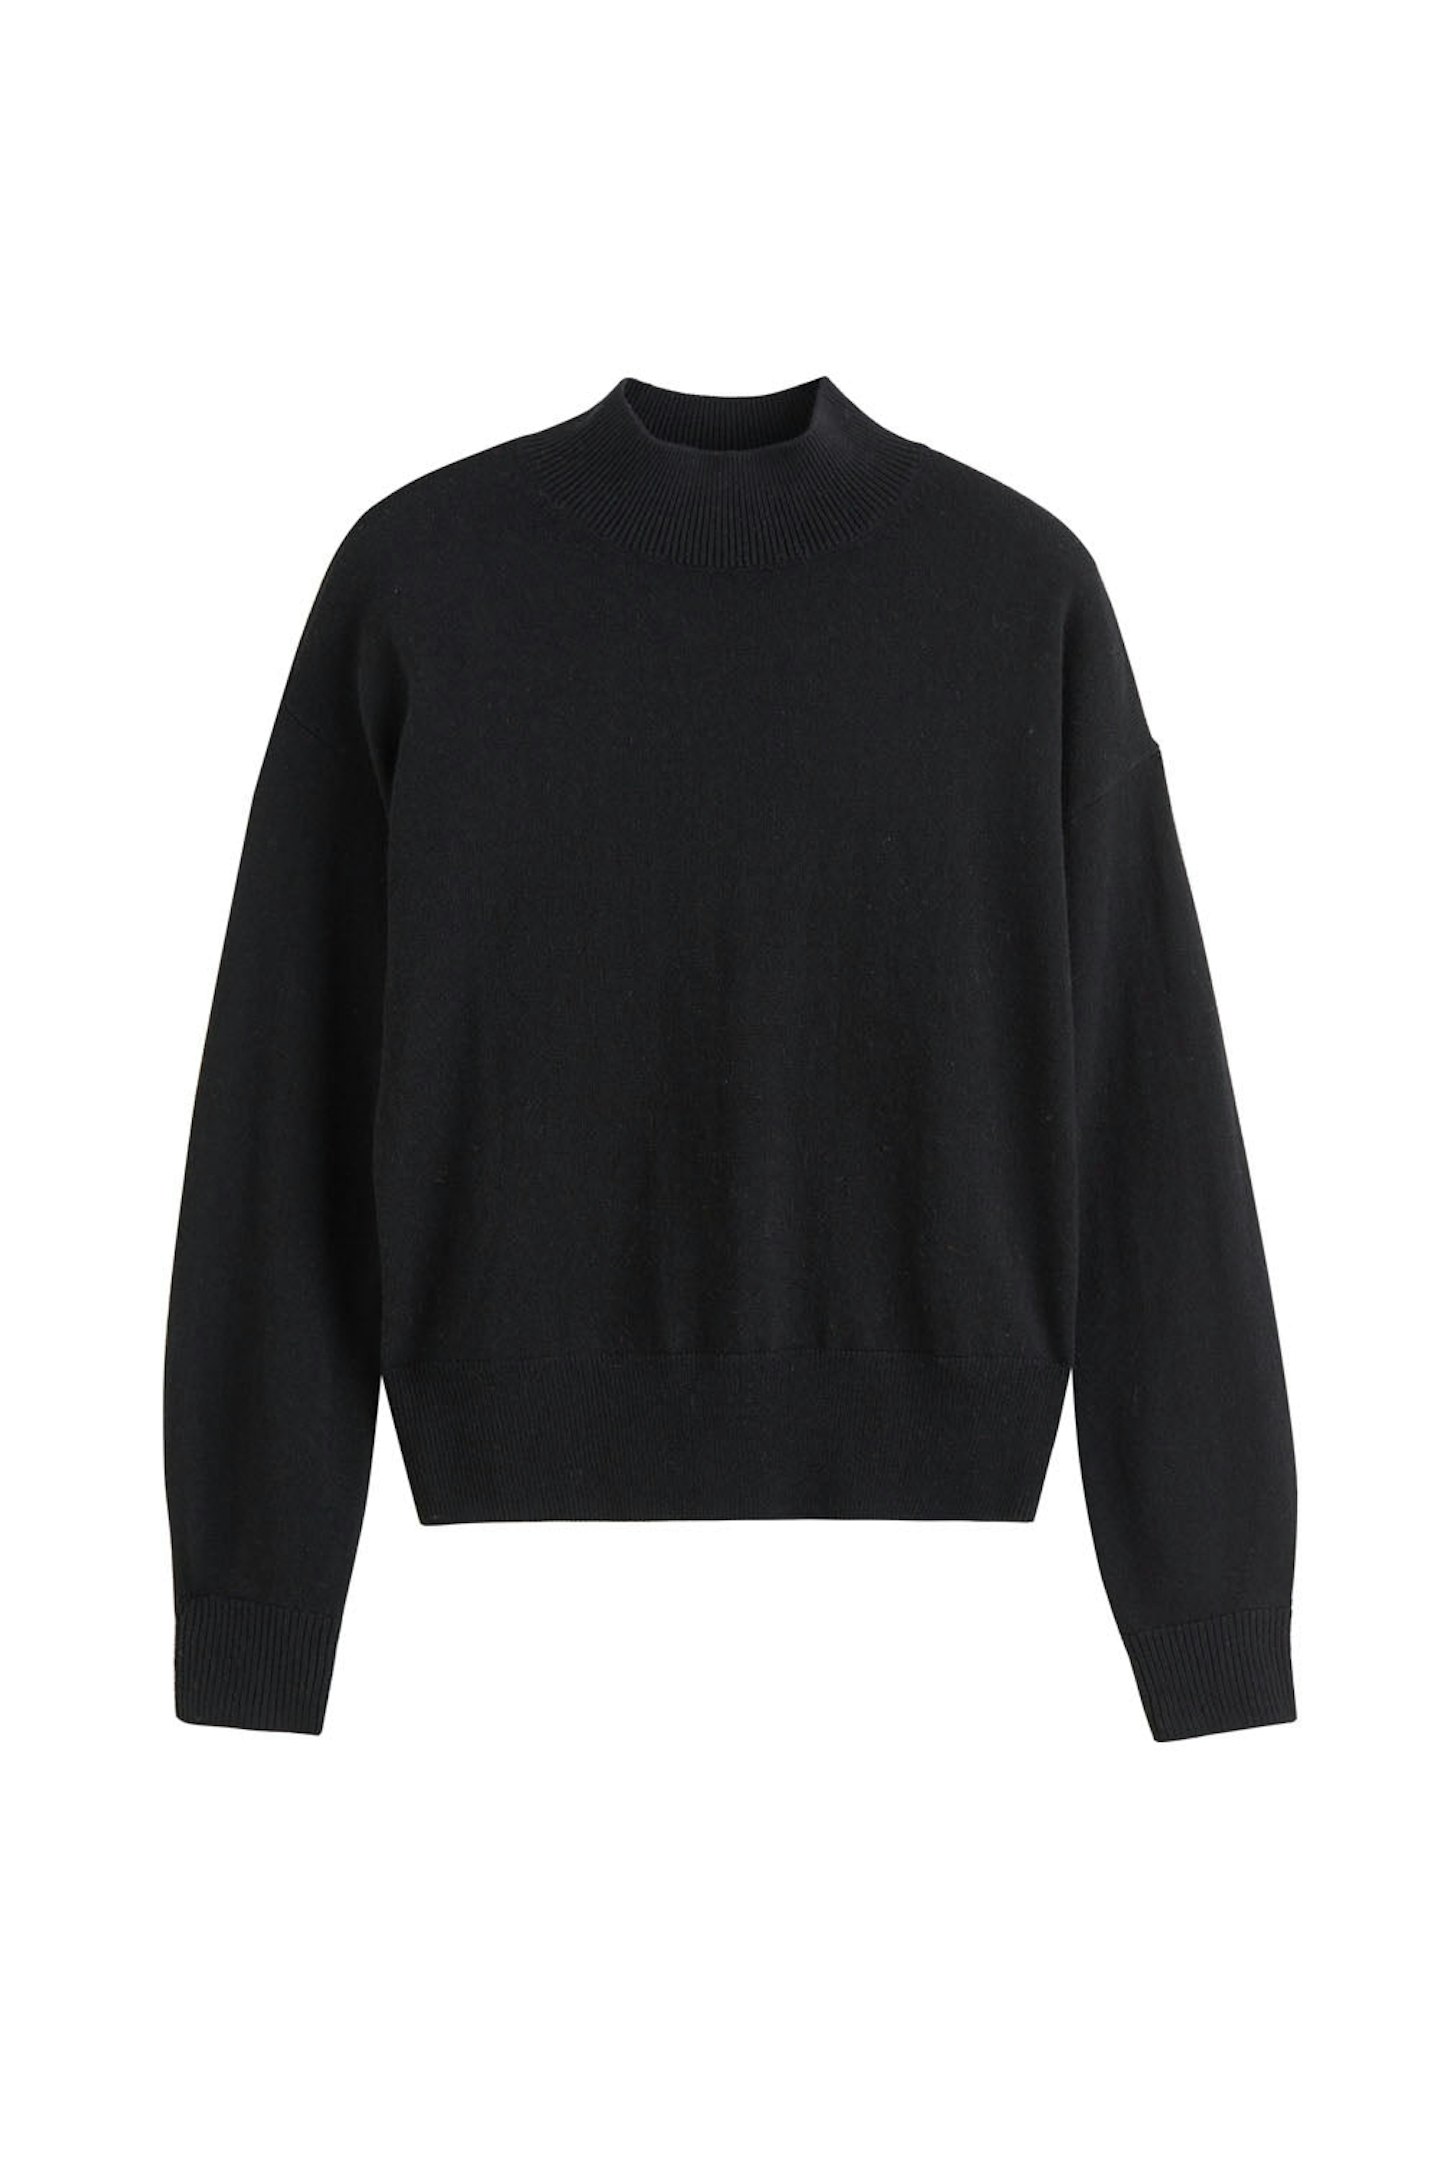 Chinti & Parker, Black Wool-Cashmere Bell Sleeve Sweater